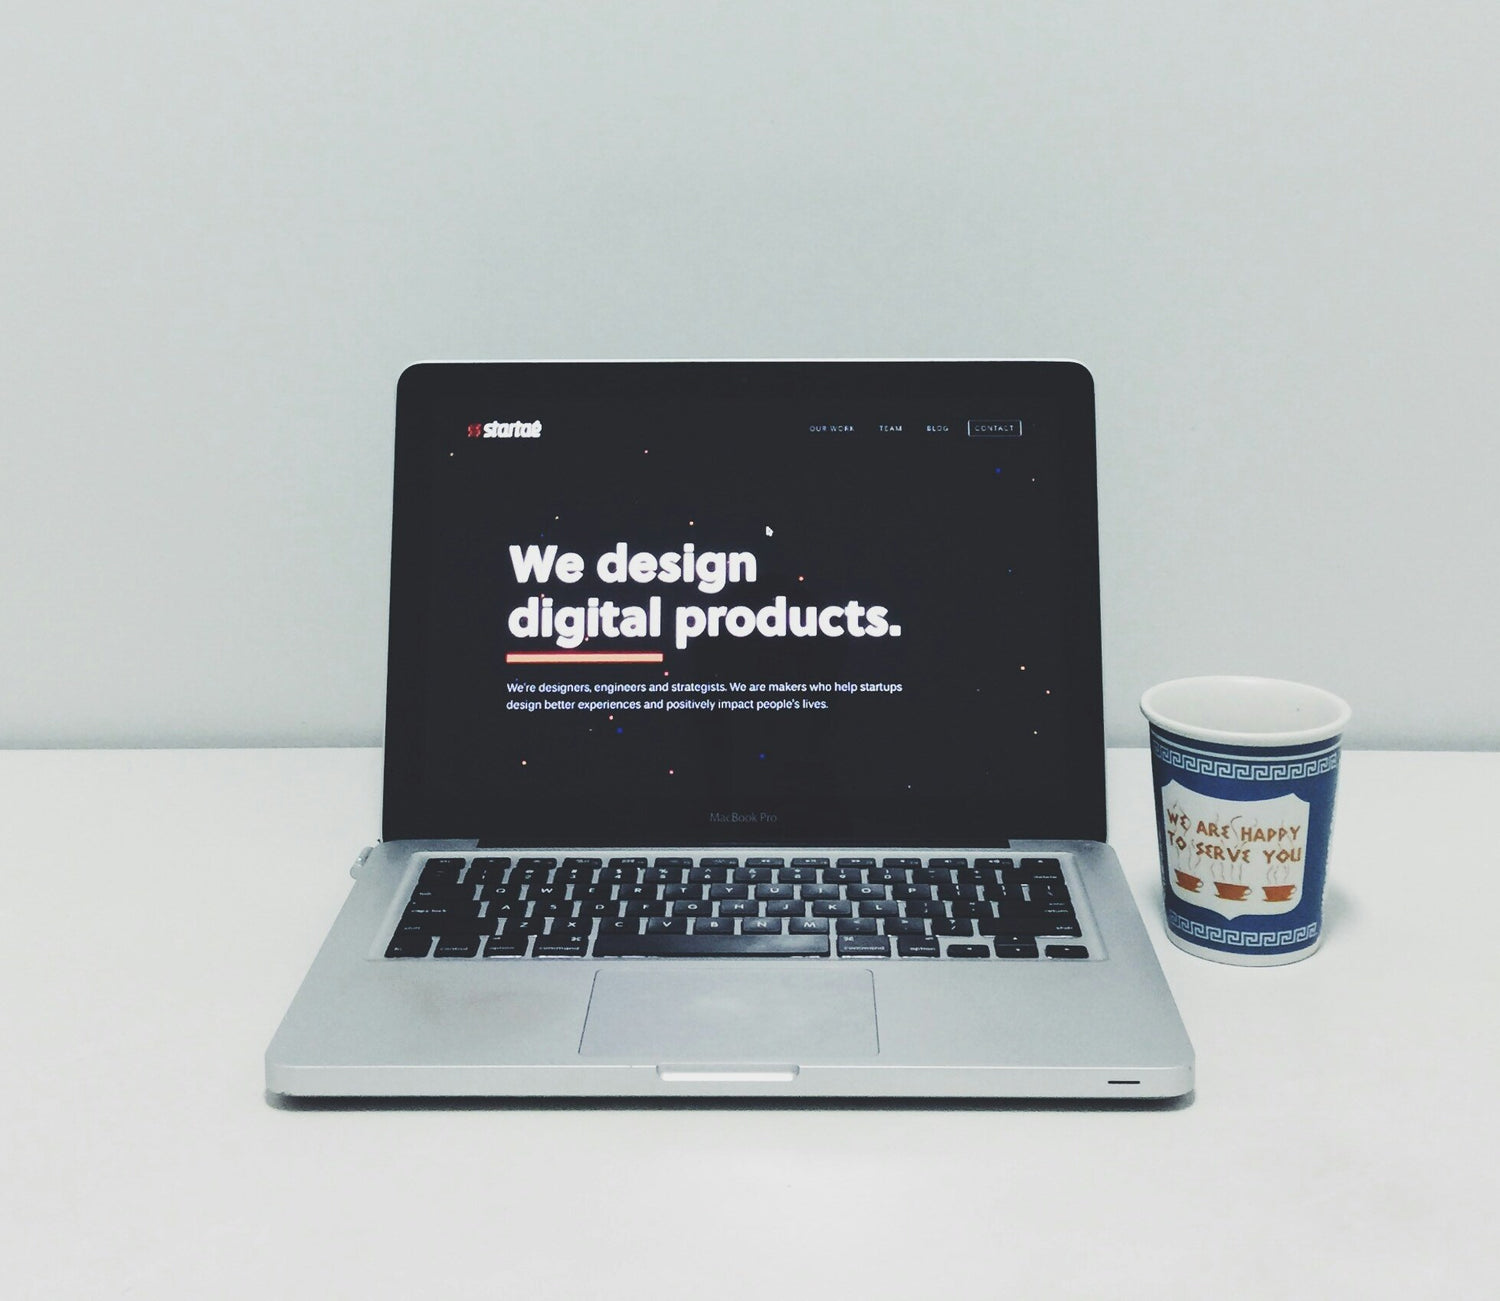 an image of a mackbook showing we design digital products in resell nest plr store